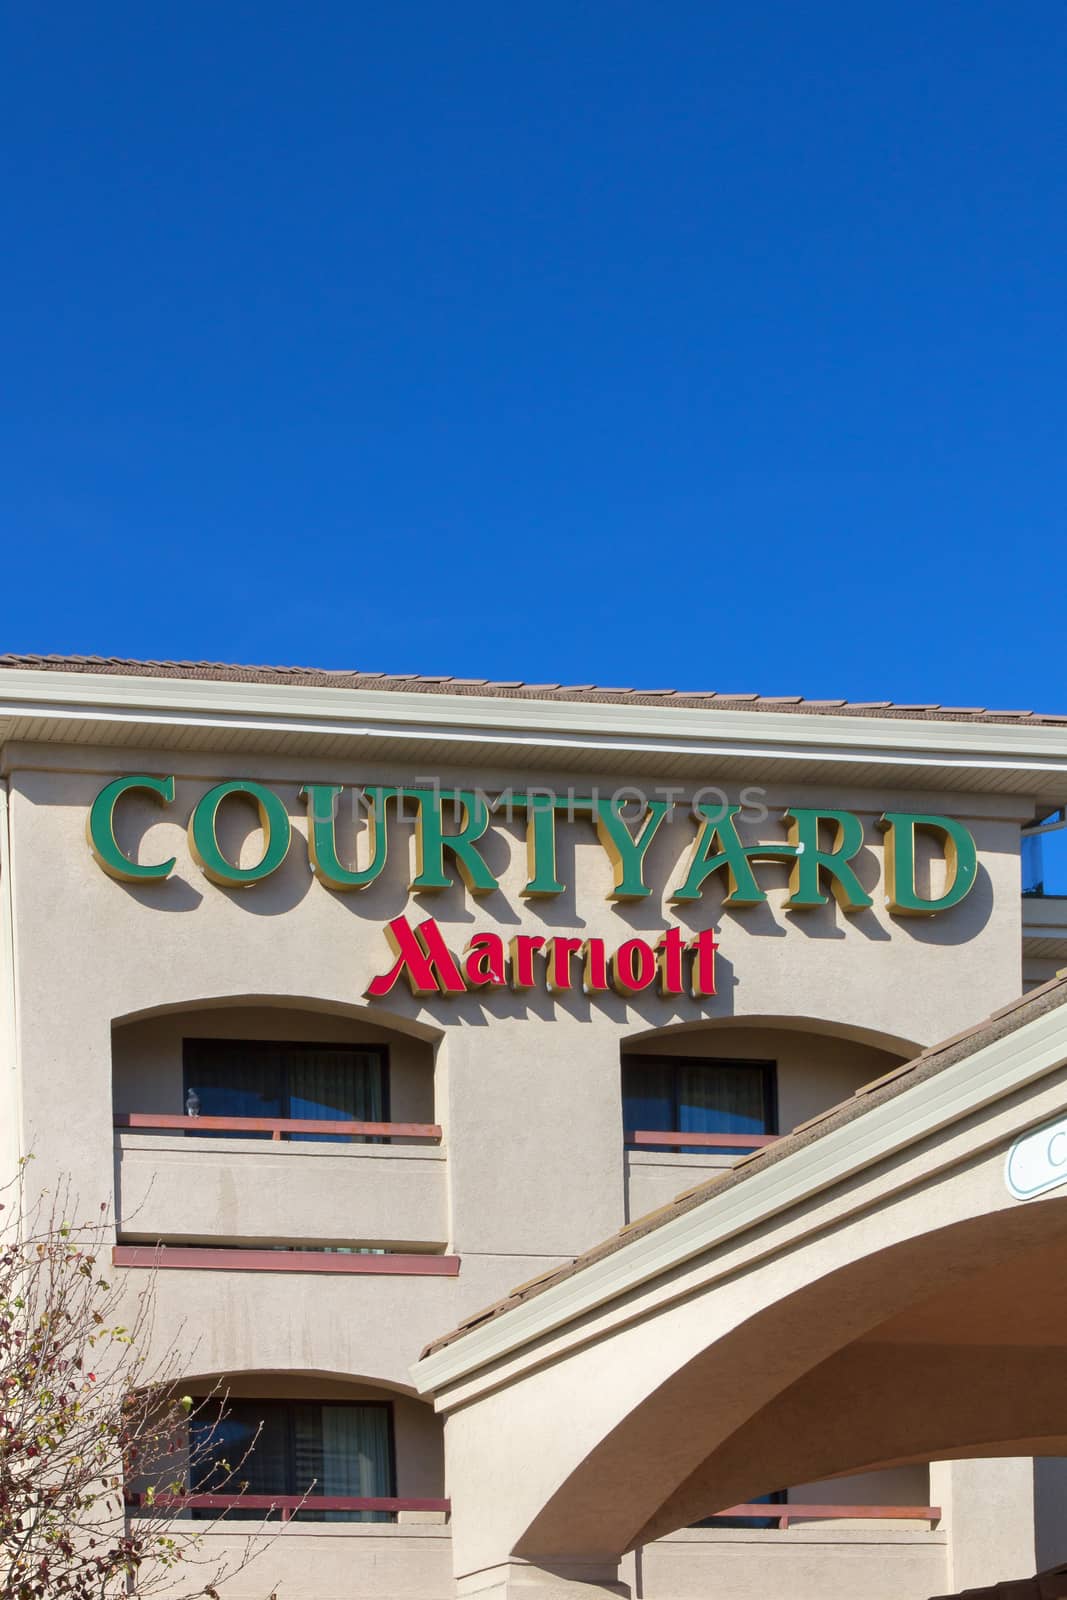 Courtyard by Marriot motel exterior by wolterk